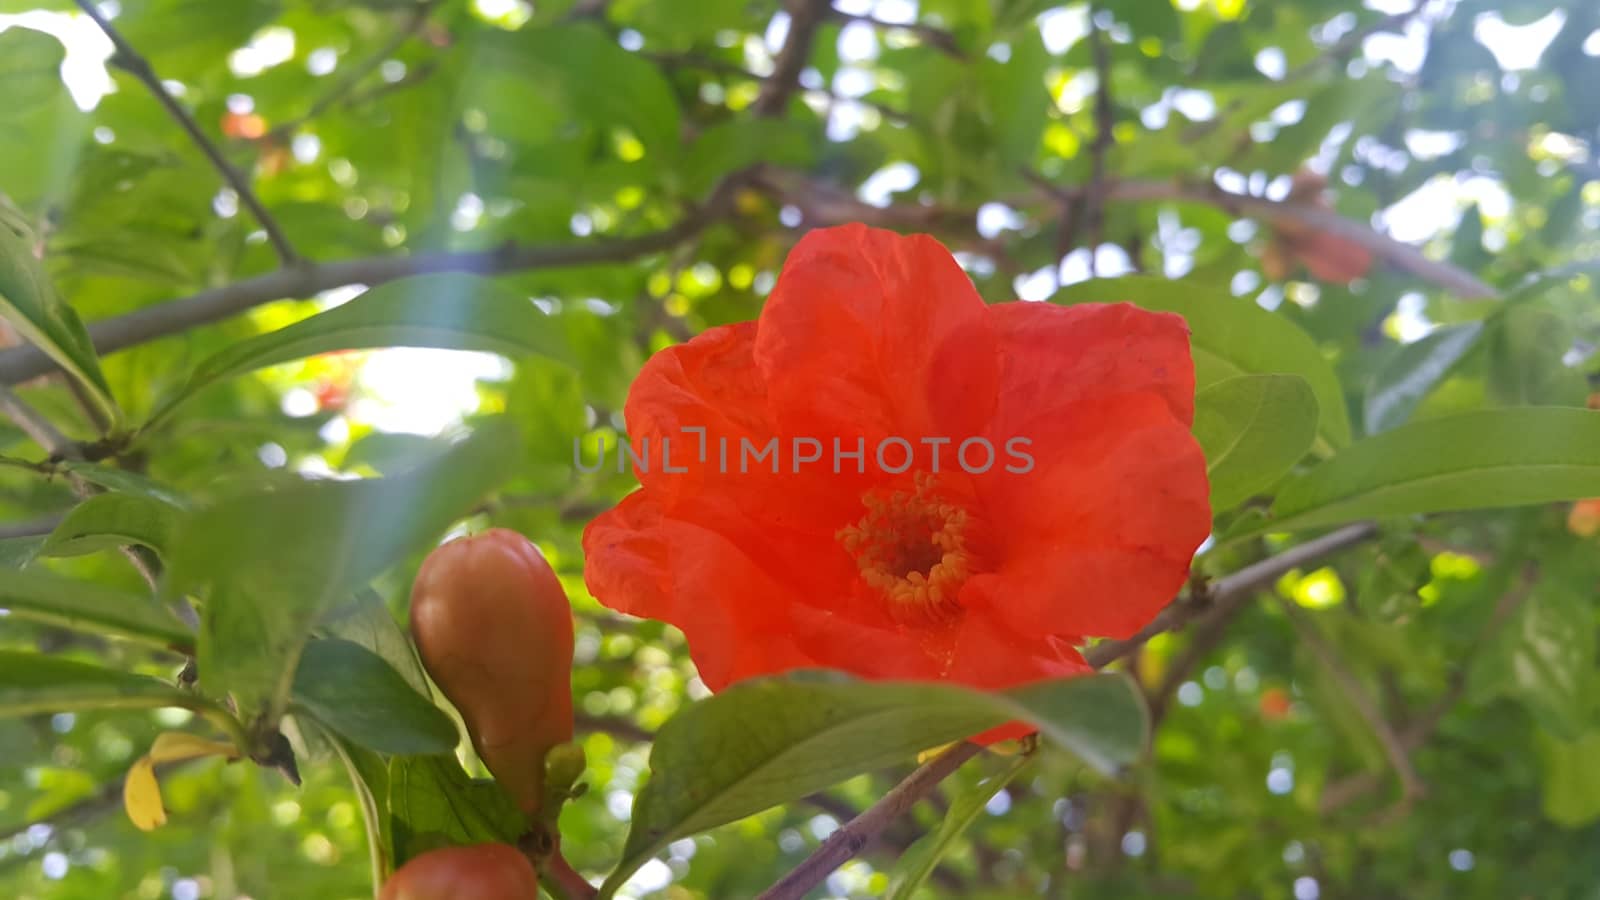 Red flower with stamens and green leaves in background by Photochowk